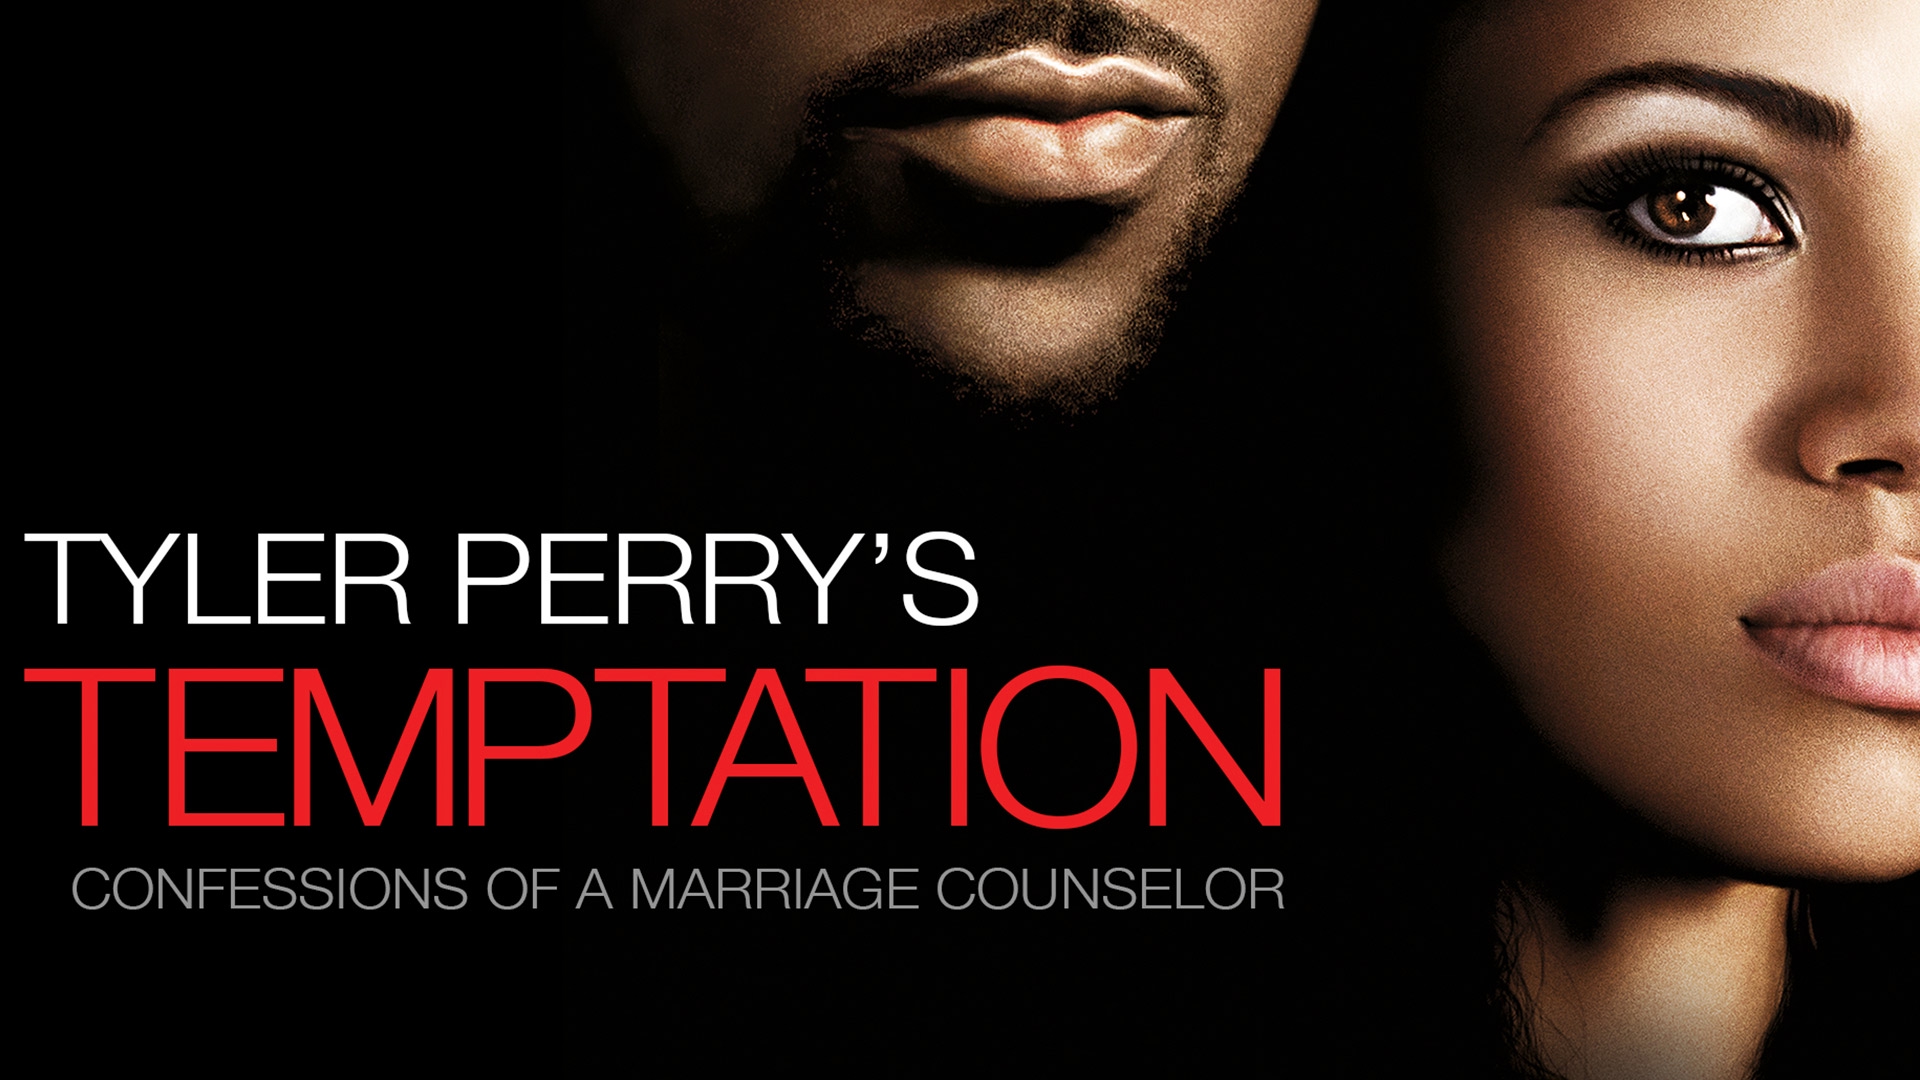 Temptation: Confessions of a Marriage Counselor nude photos